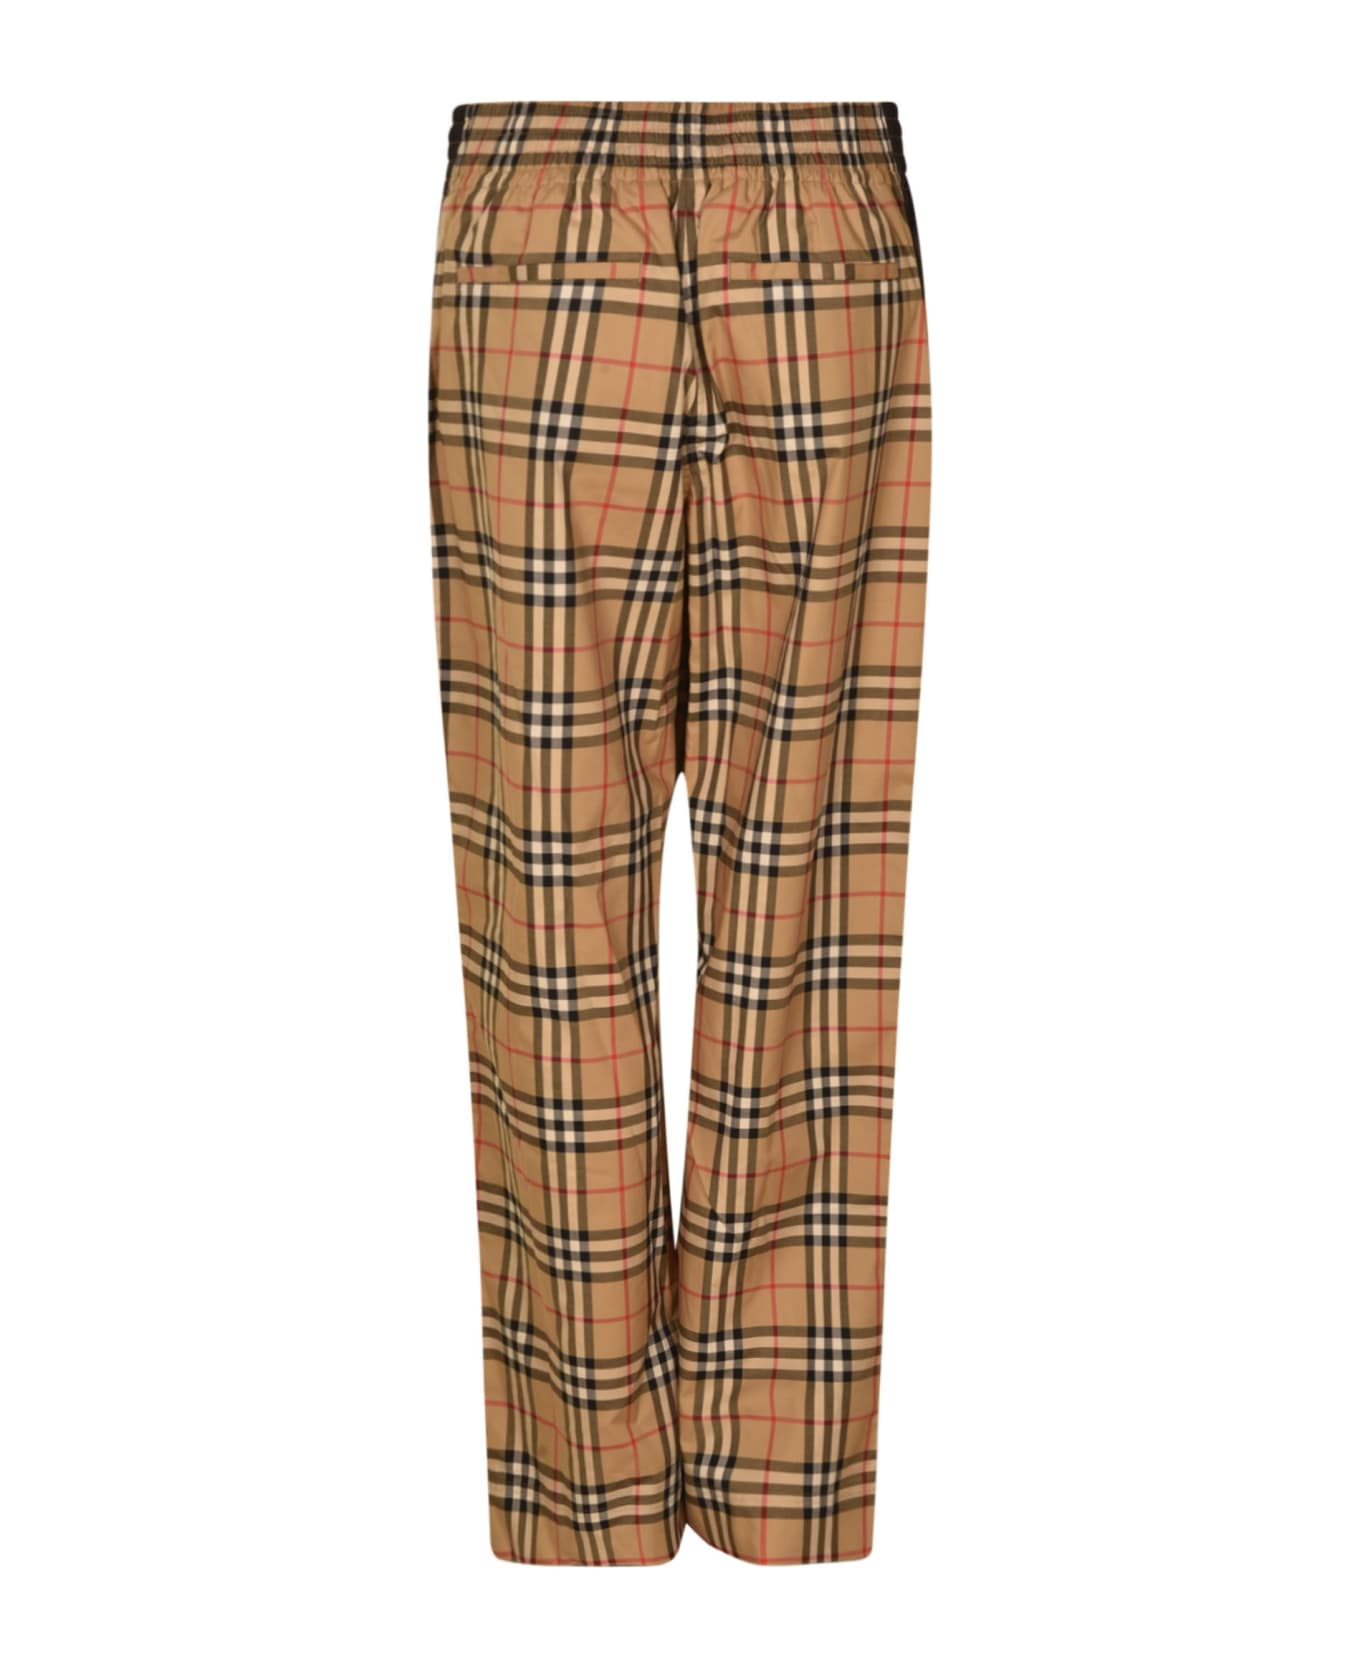 Burberry Elastic Waist Check Trousers - Archive beige ip check